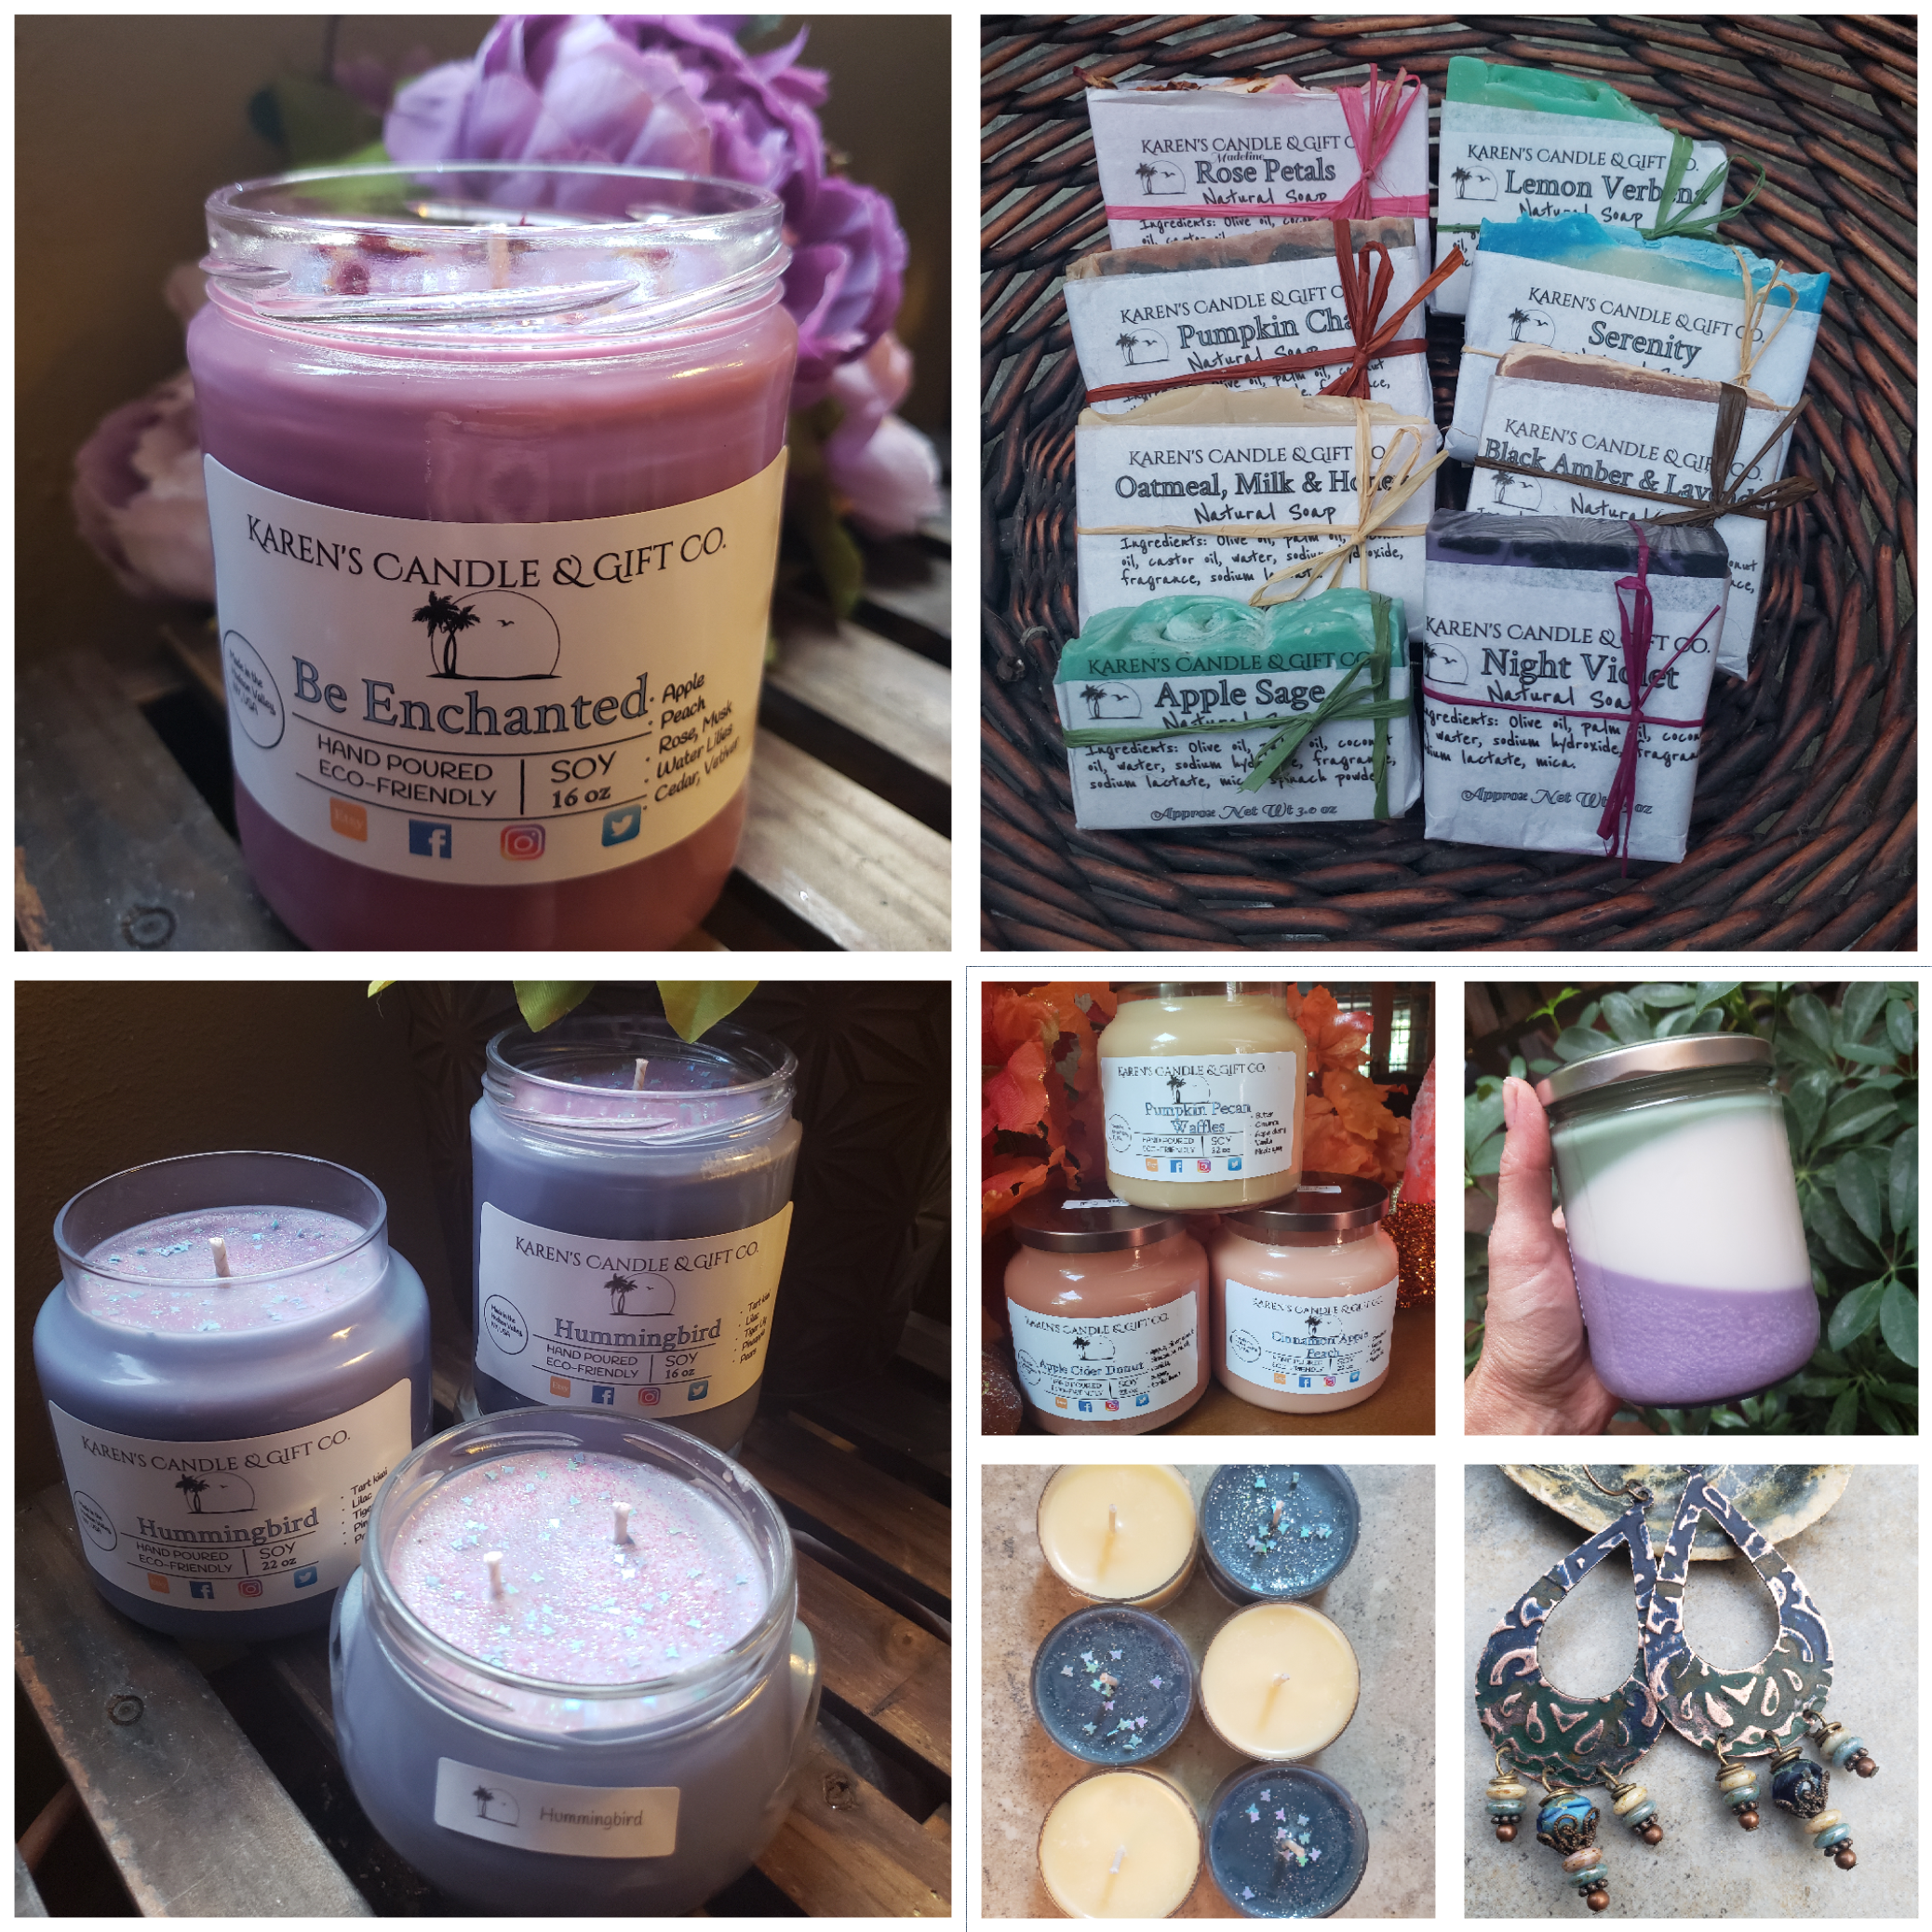 Karen's Candle & Gift Co.